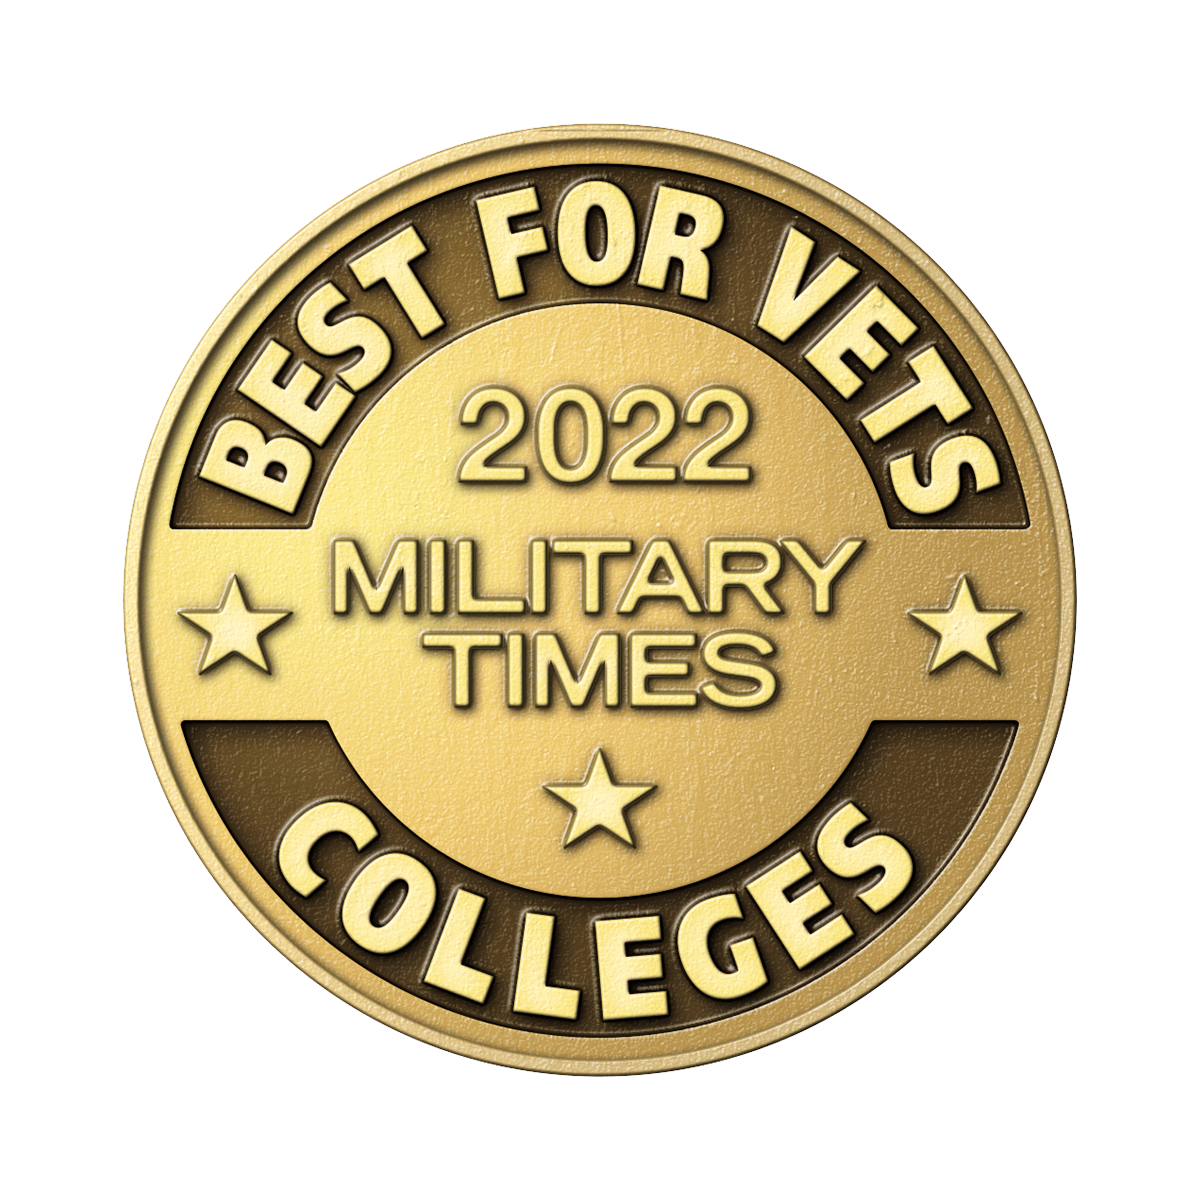 Best For Vets Colleges - 2022 Military Times